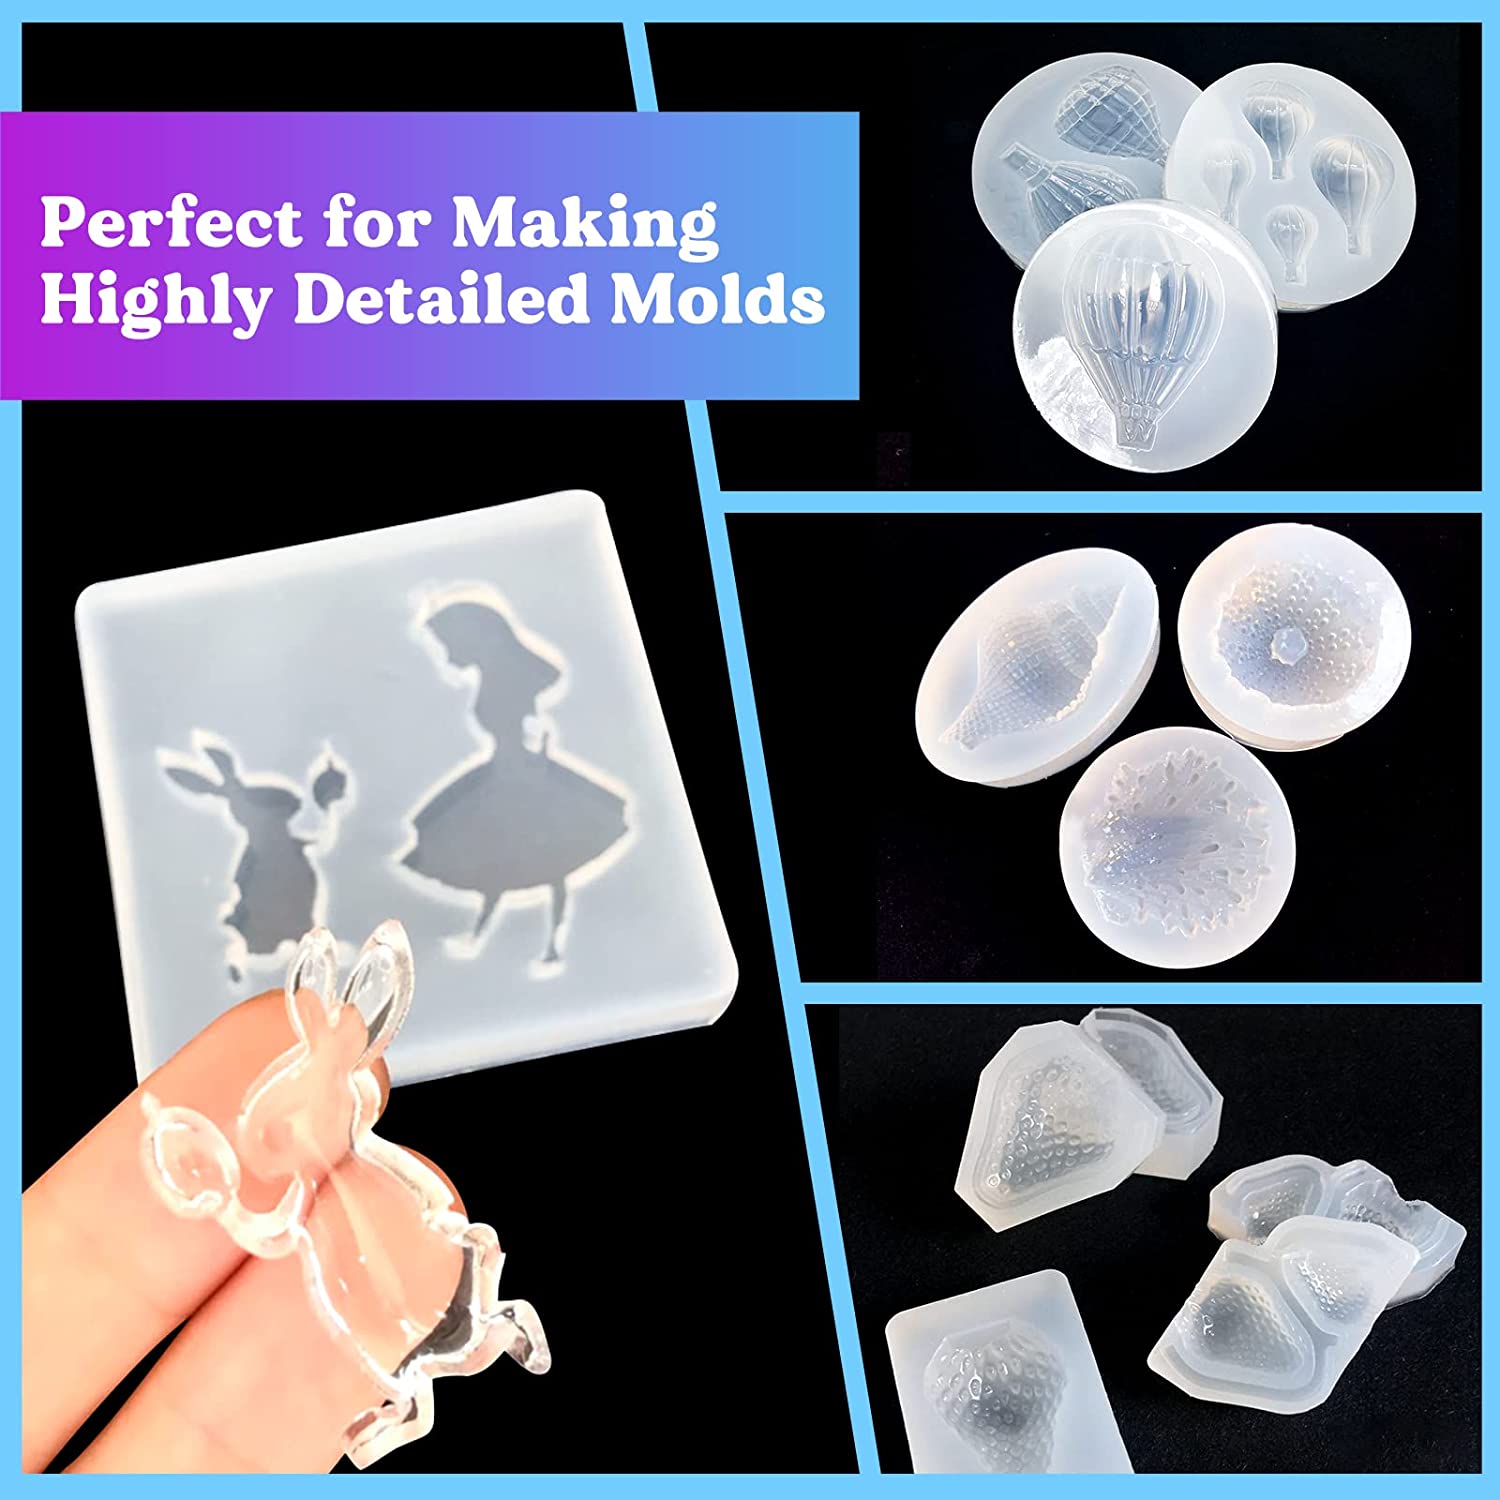 Food Grade Translucent Silicone Mold Maker, Translucent Liquid Mold Maker, Clear Mold Making, Make Your Own Silicone Mold for UV Resin